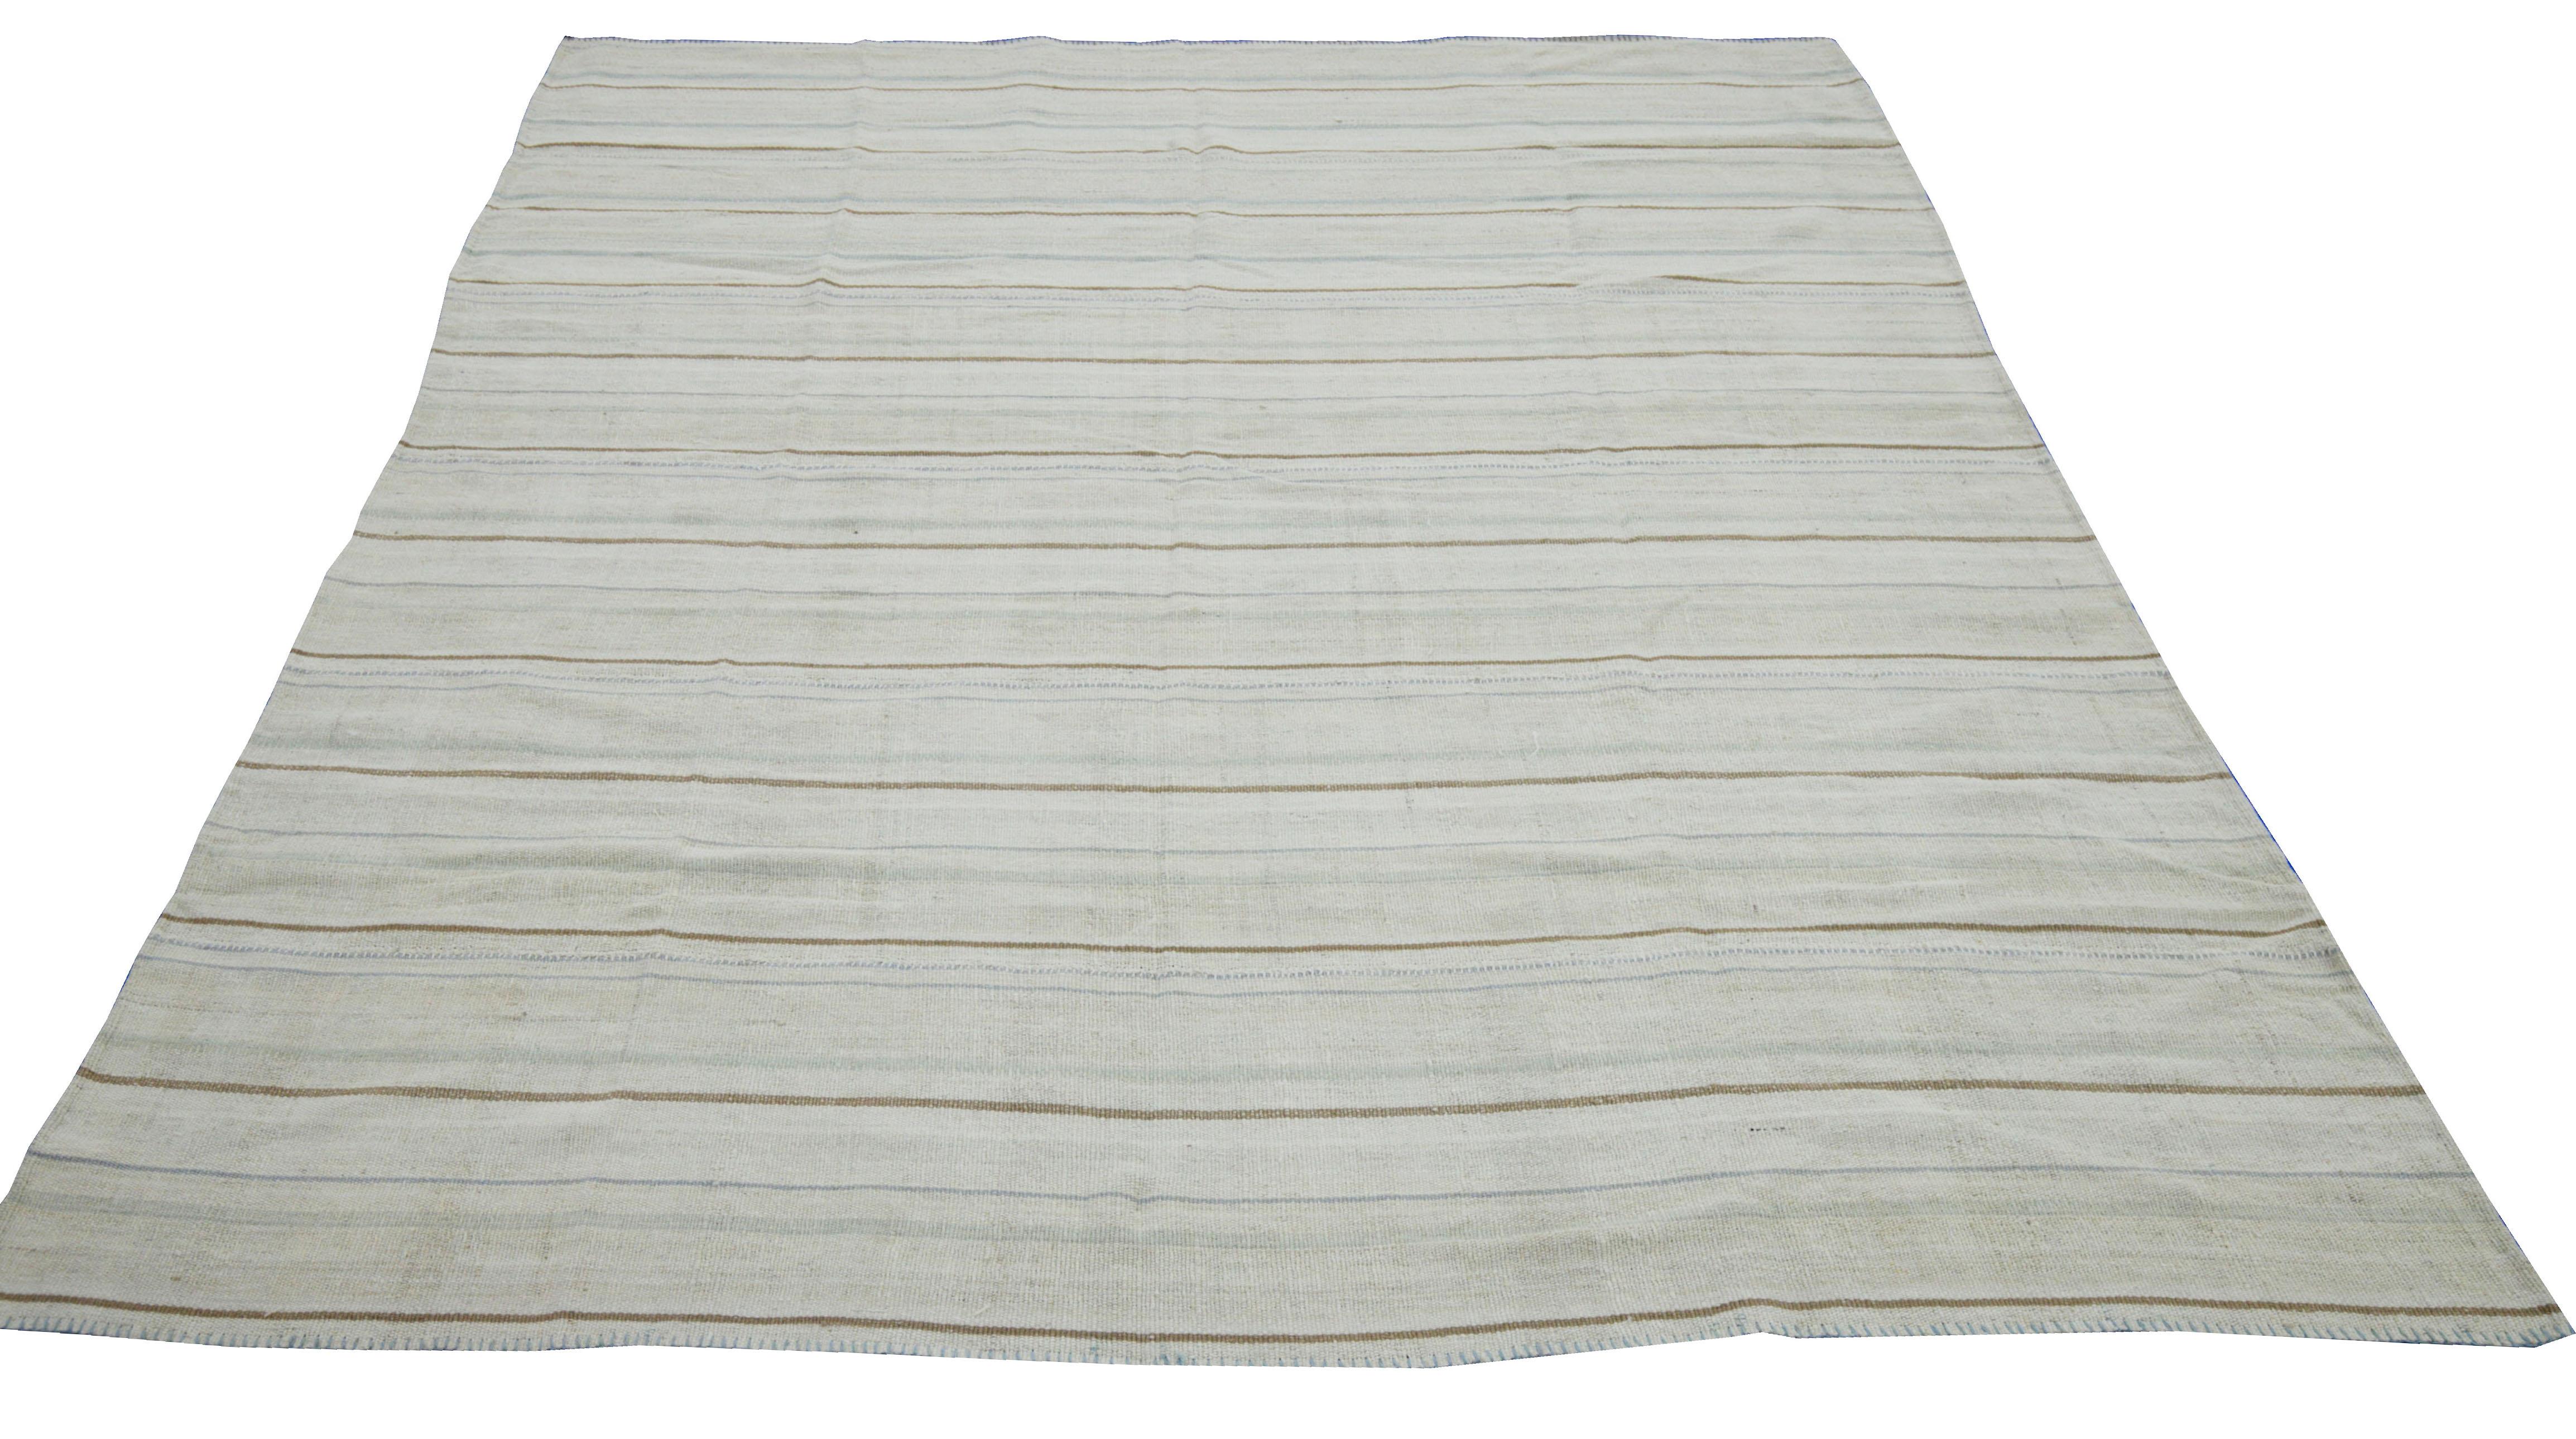  A new production Turkish rug handwoven from the finest sheep’s wool and colored with all-natural vegetable dyes that are safe for humans and pets. It’s a traditional Kilim flat-weave design featuring a lovely ivory field with gray, white and brown